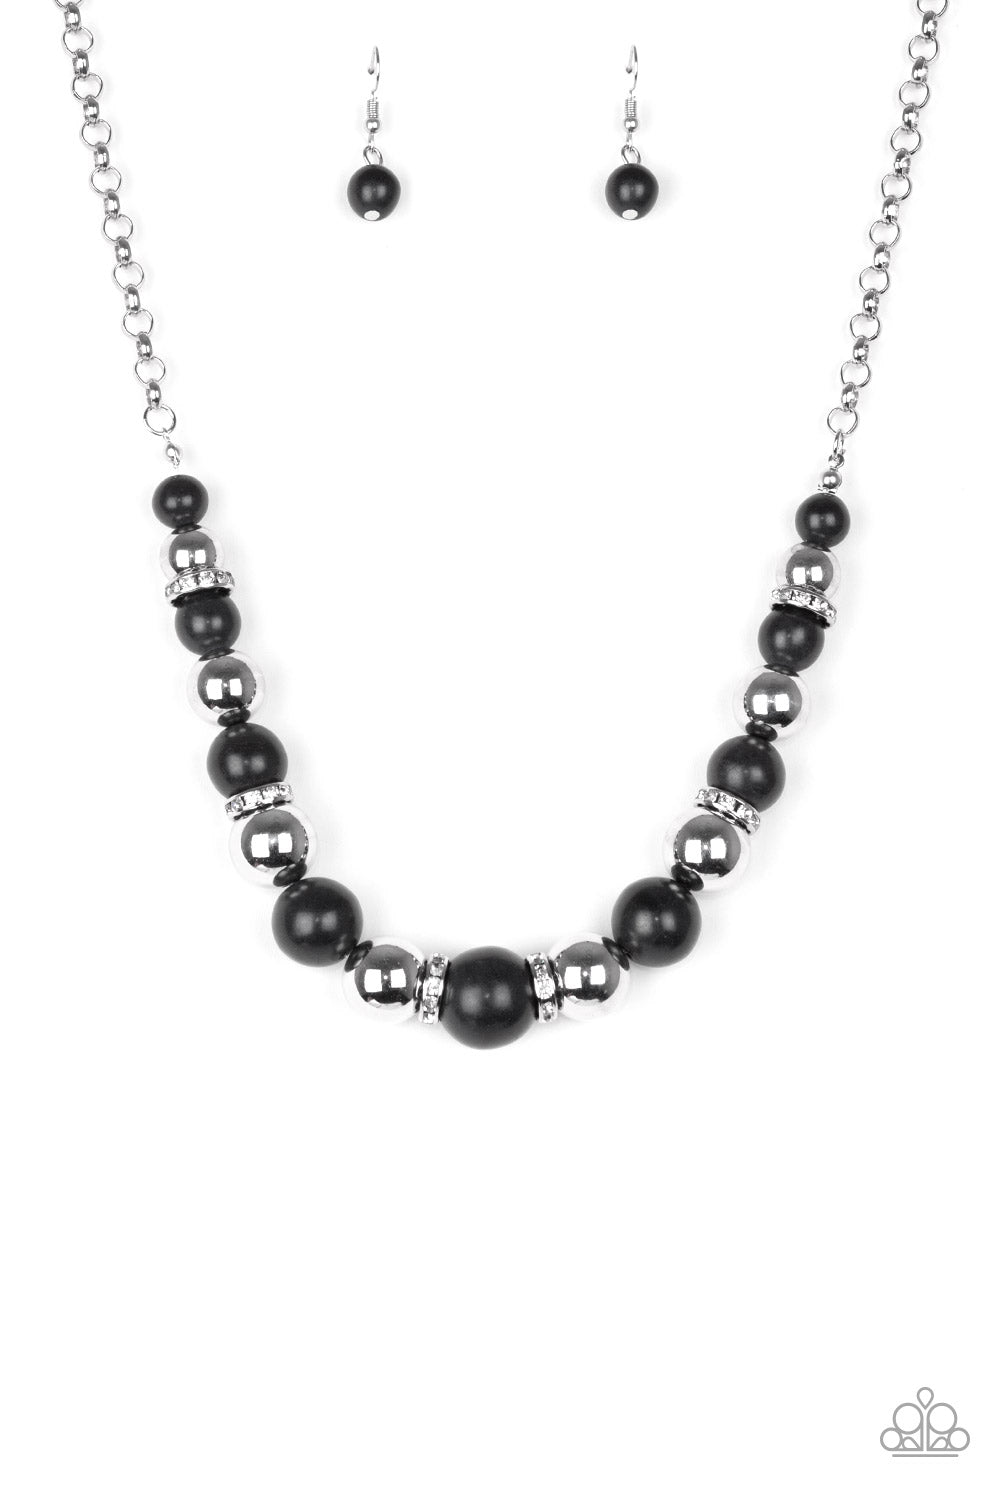 Necklace Set - The Ruling Class - Black